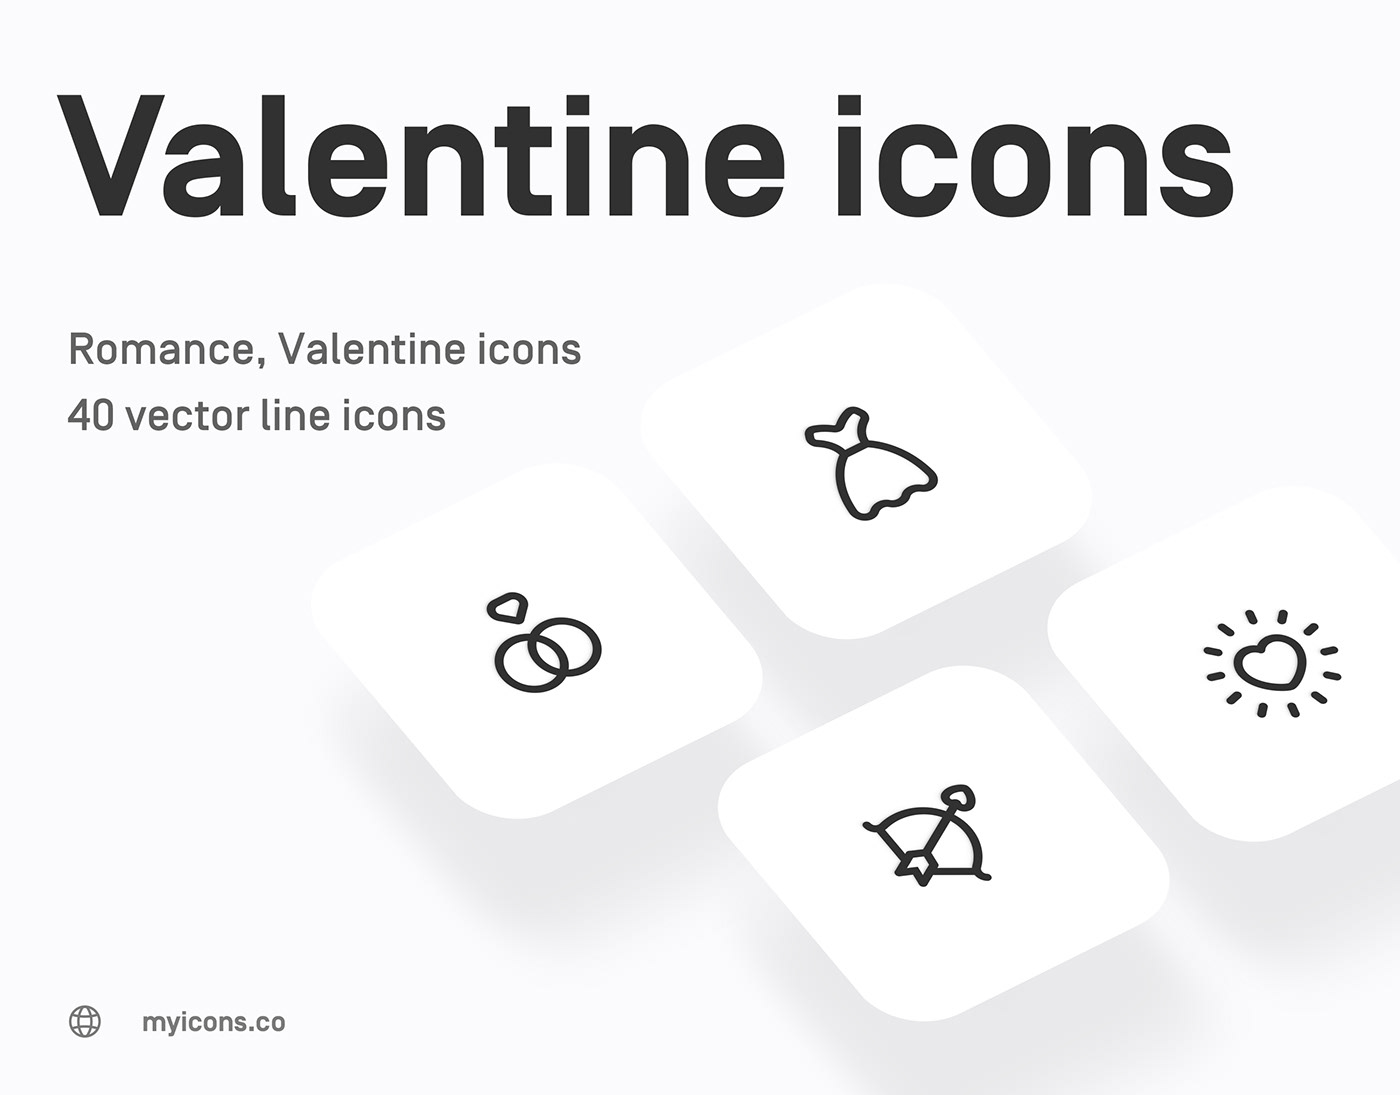 valentine valentine icons Valentine’s Day Icons Valentine Vector Line Valentine Line Line icons Romance Icons Love Icons Heart icons icon pack